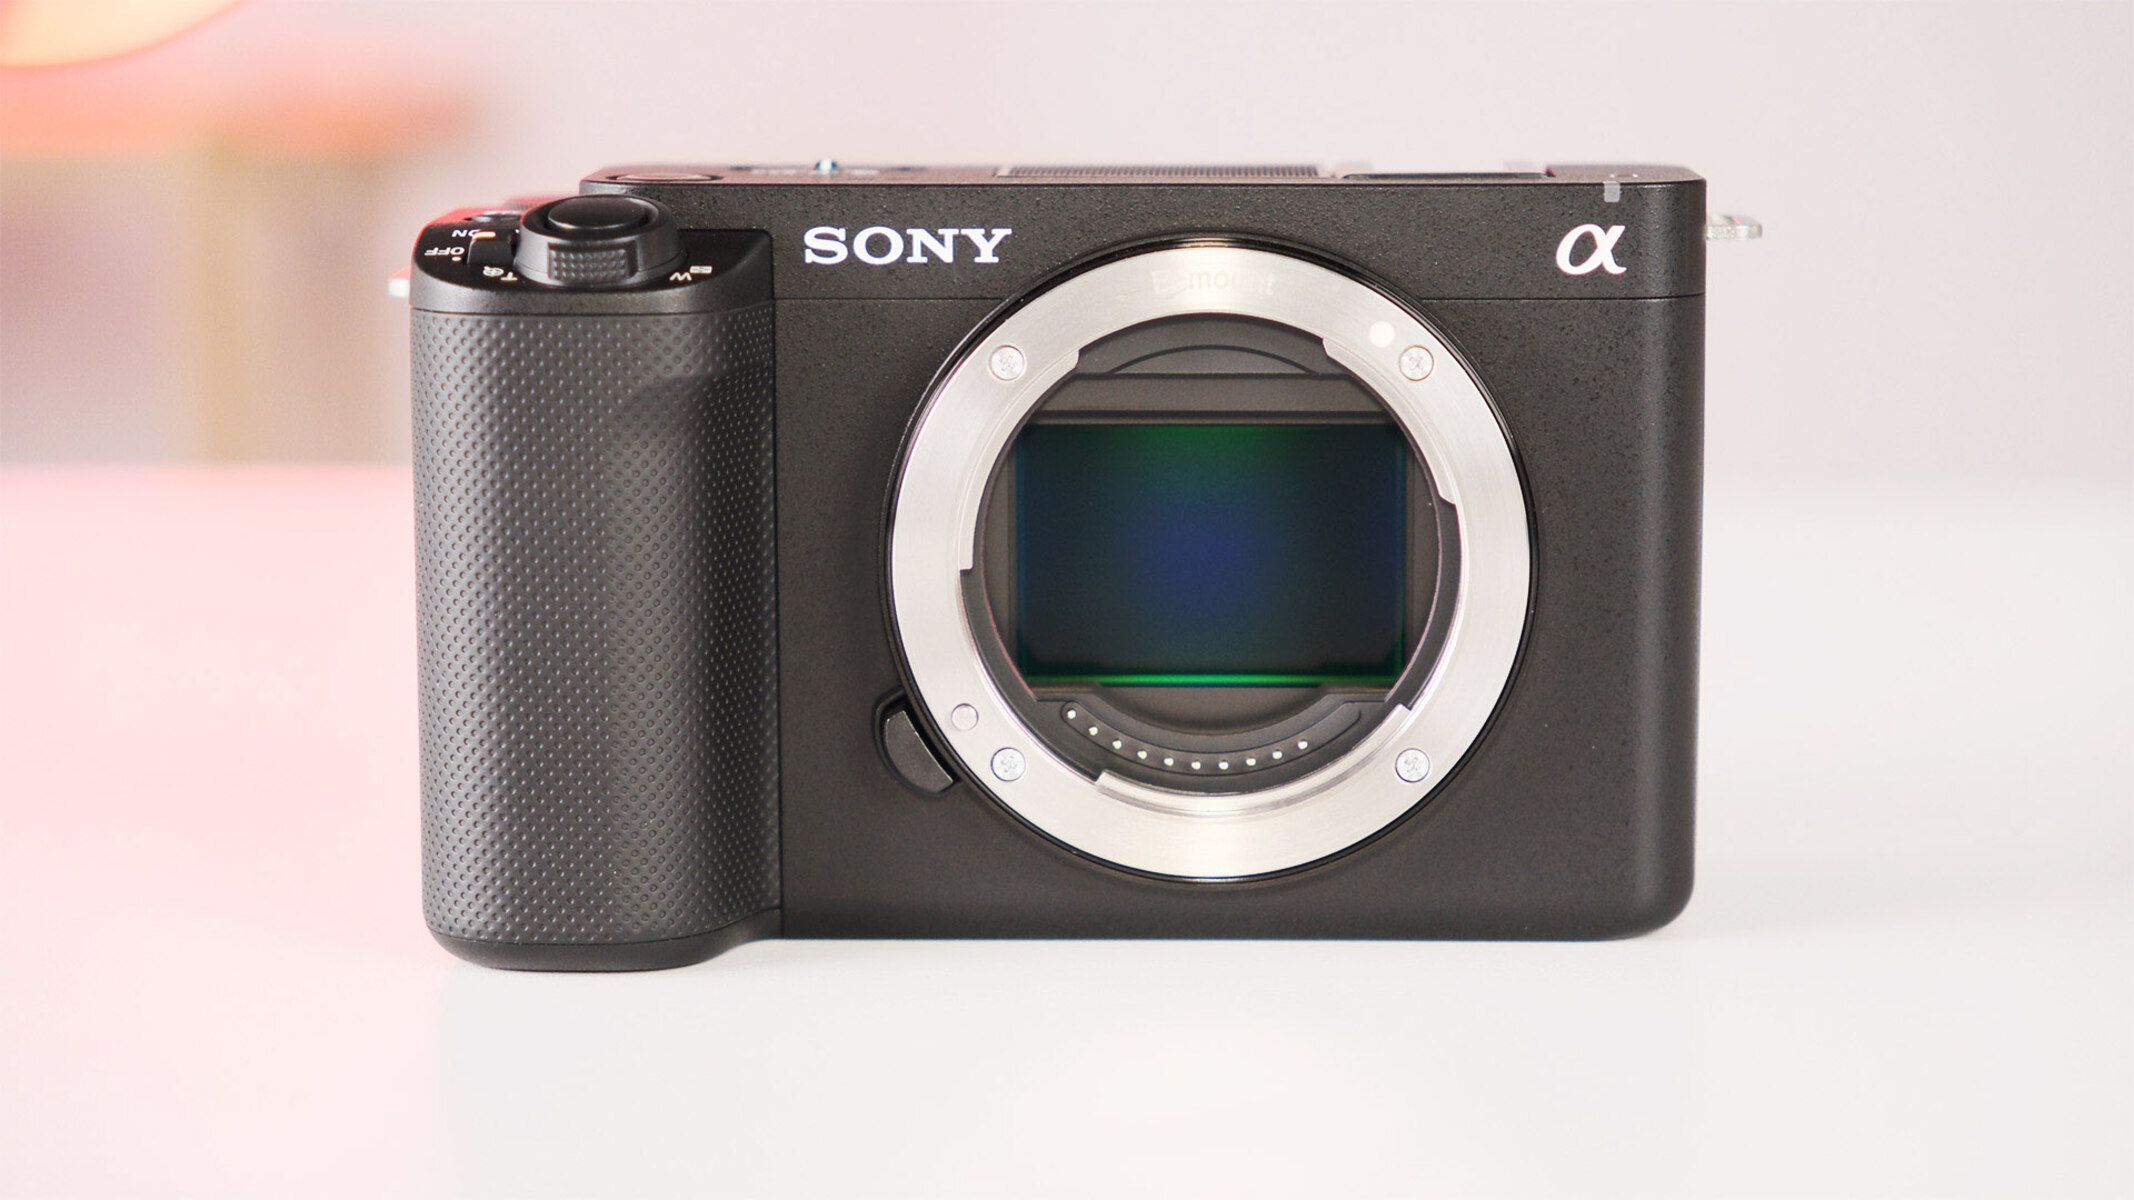 How Do I Enable Clean Image Zoom On A Sony Mirrorless Camera?